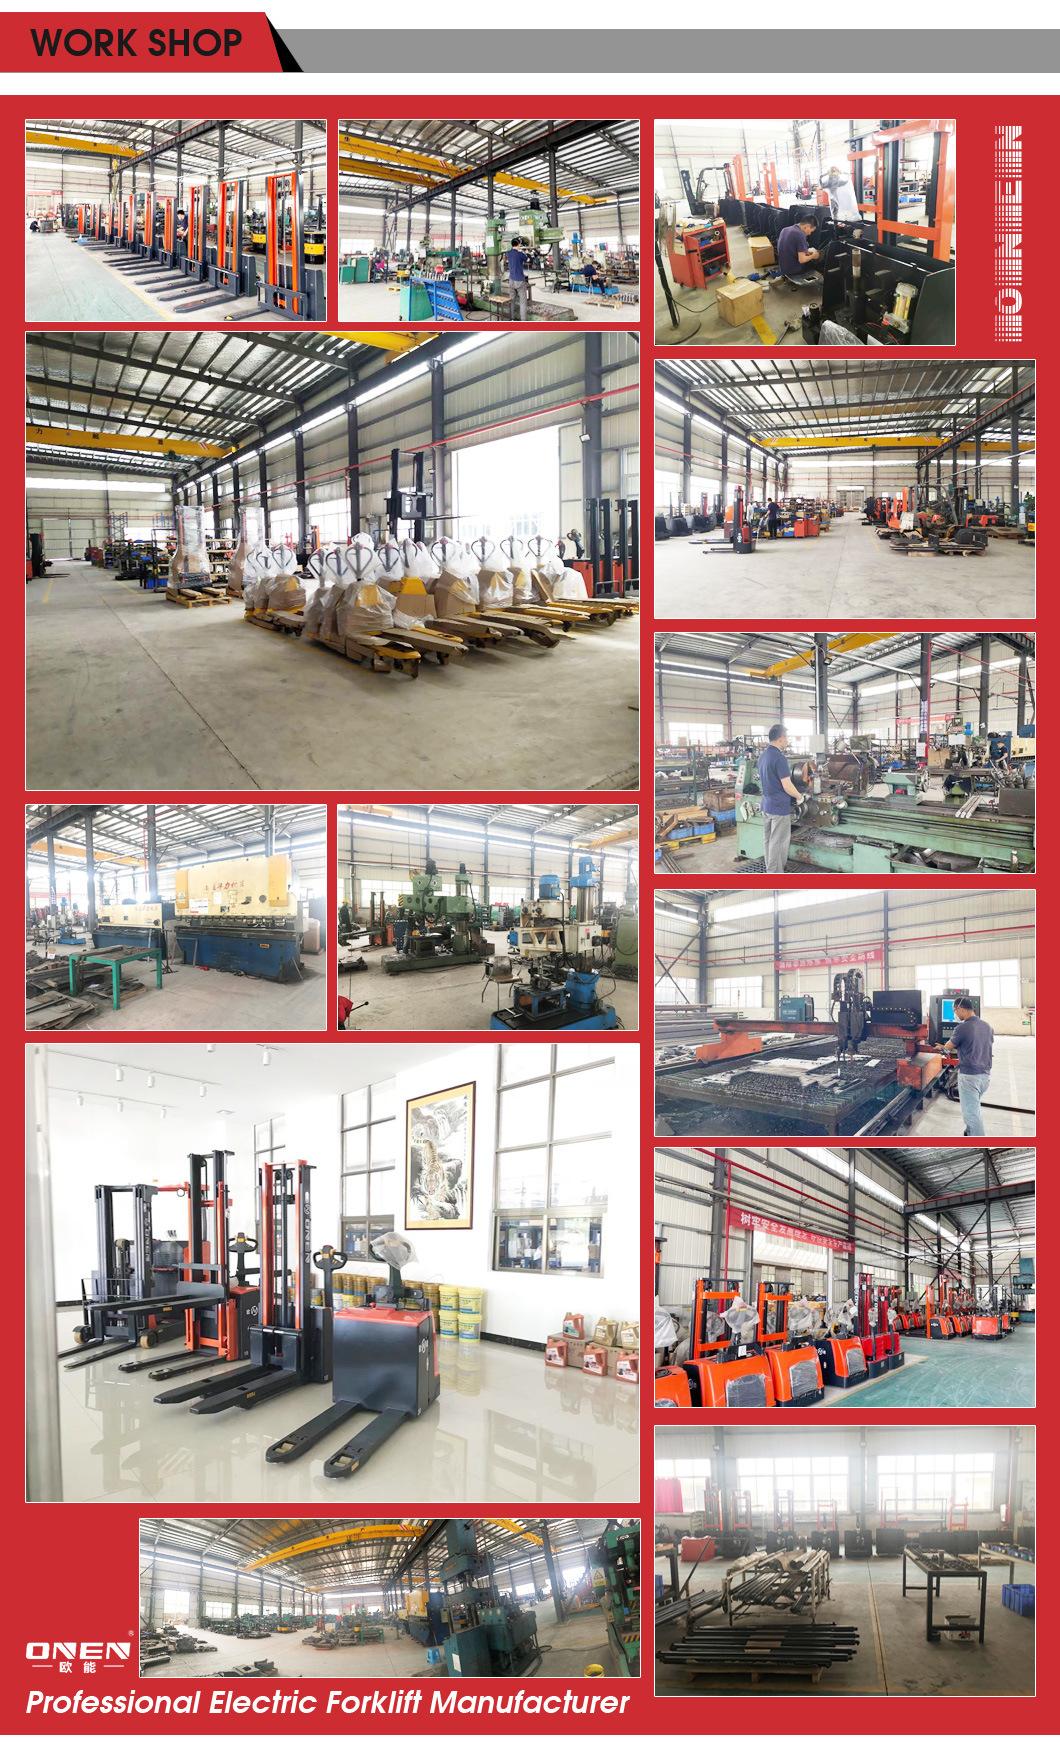 Warehouse Industrial 3000-3500kg Four Wheel Countbalance Balance Heavy Diesel Fork Lift Truck/Reach Forklift/ Forklift Truck with ISO14001/9001 TUV GS CE Tested